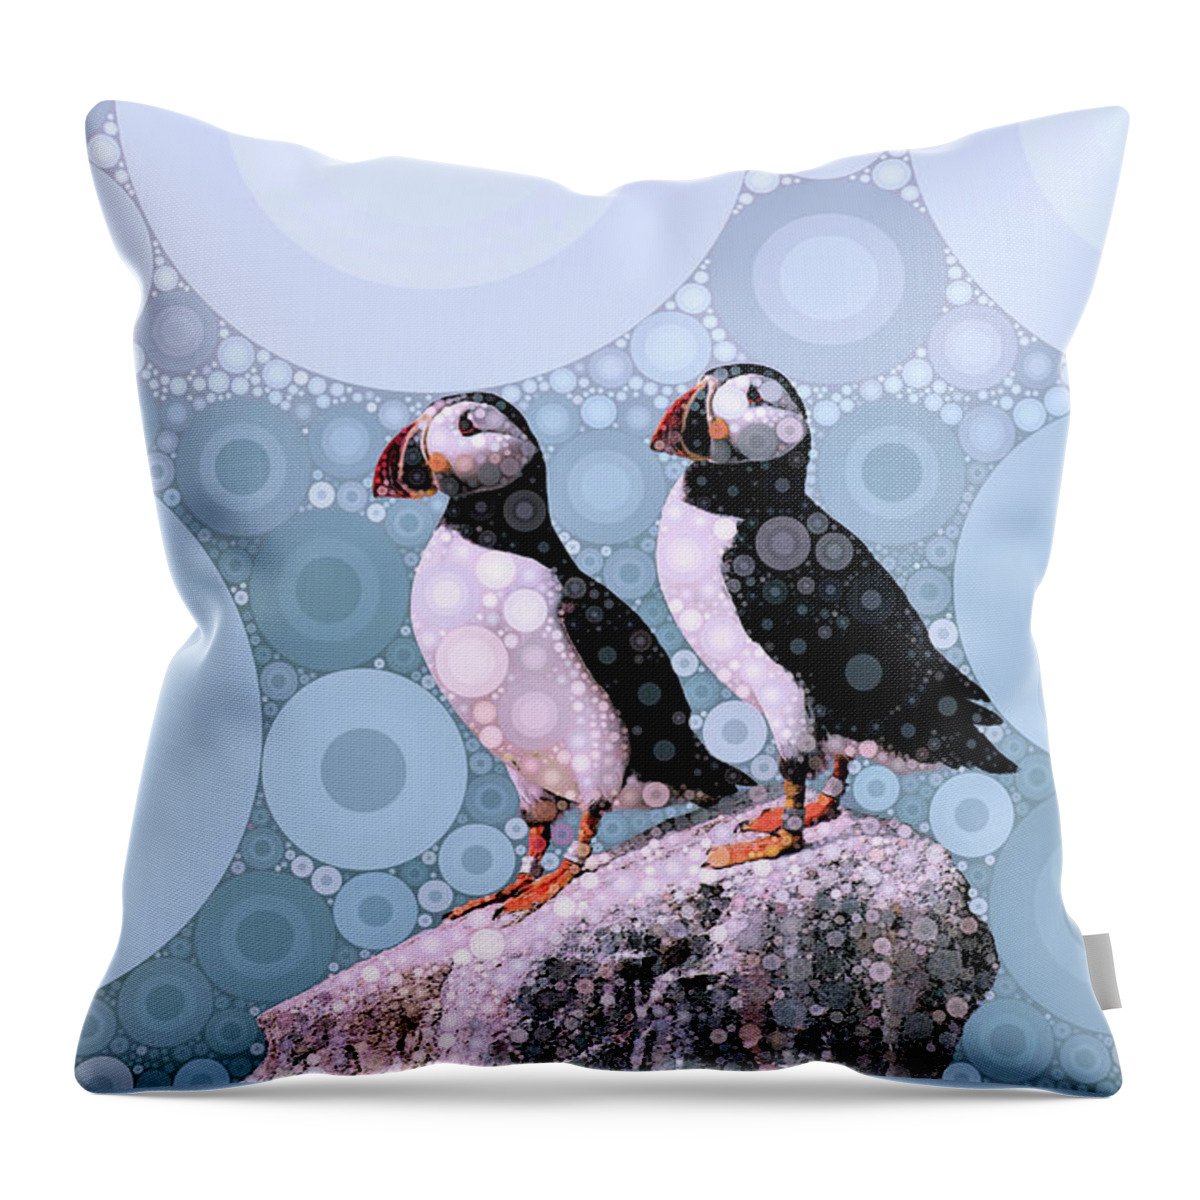 Puffins By The Sea Throw Pillow featuring the mixed media Puffins by the Sea by Susan Maxwell Schmidt